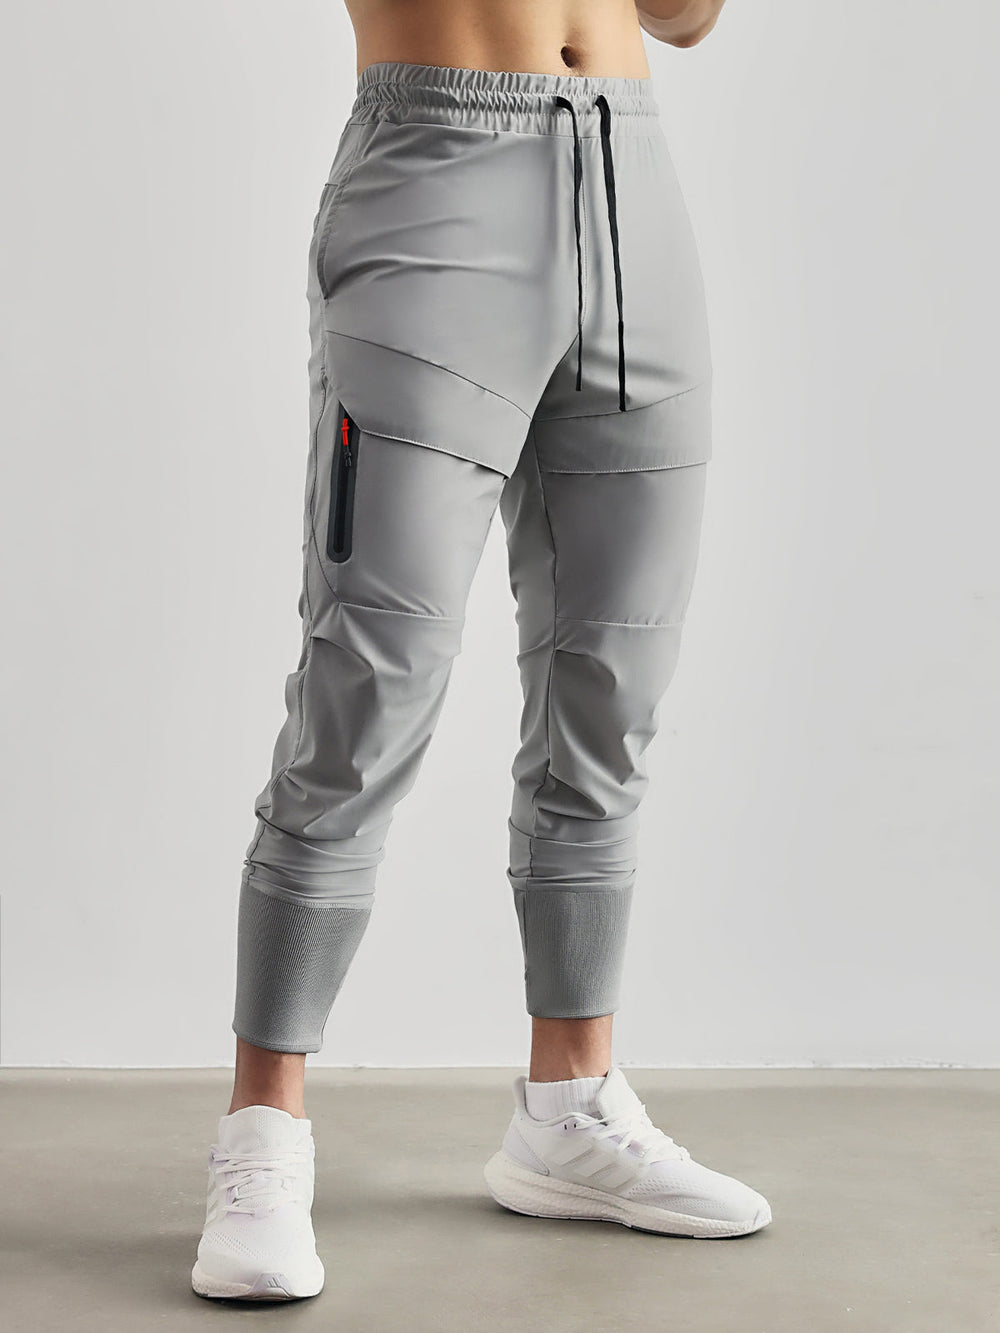 Jerry - Versatile Tech Joggers with Sweat-Wicking Tech